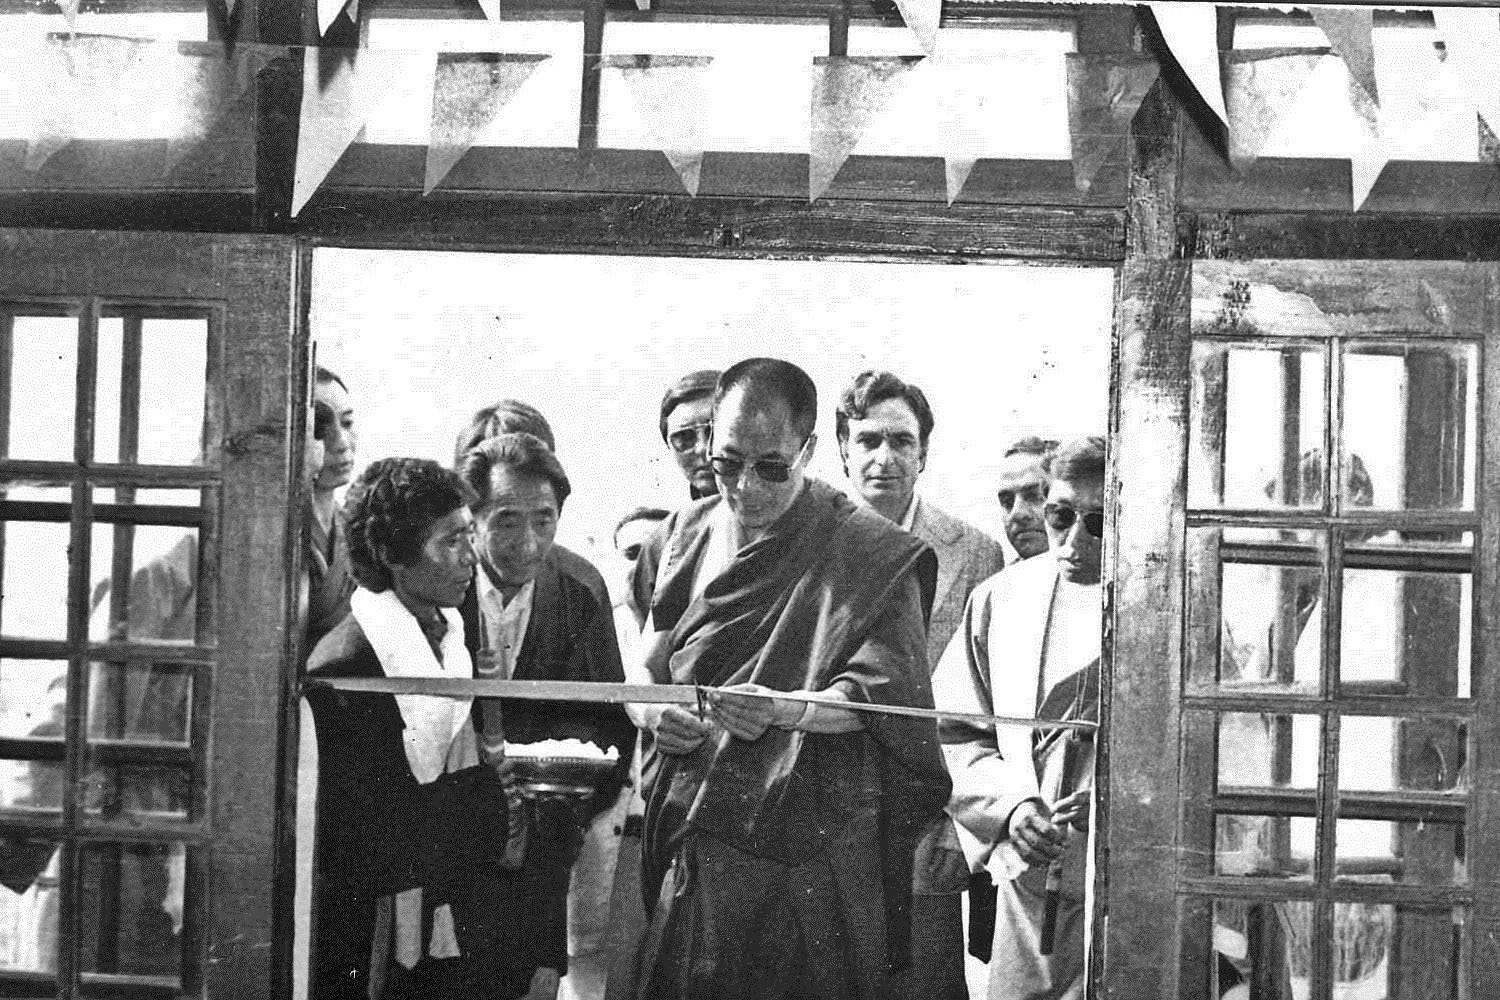 Inspiring Beginnings: His Holiness the 14th Dalai Lama blessed our village school on its “First Opening Day” in 1975.